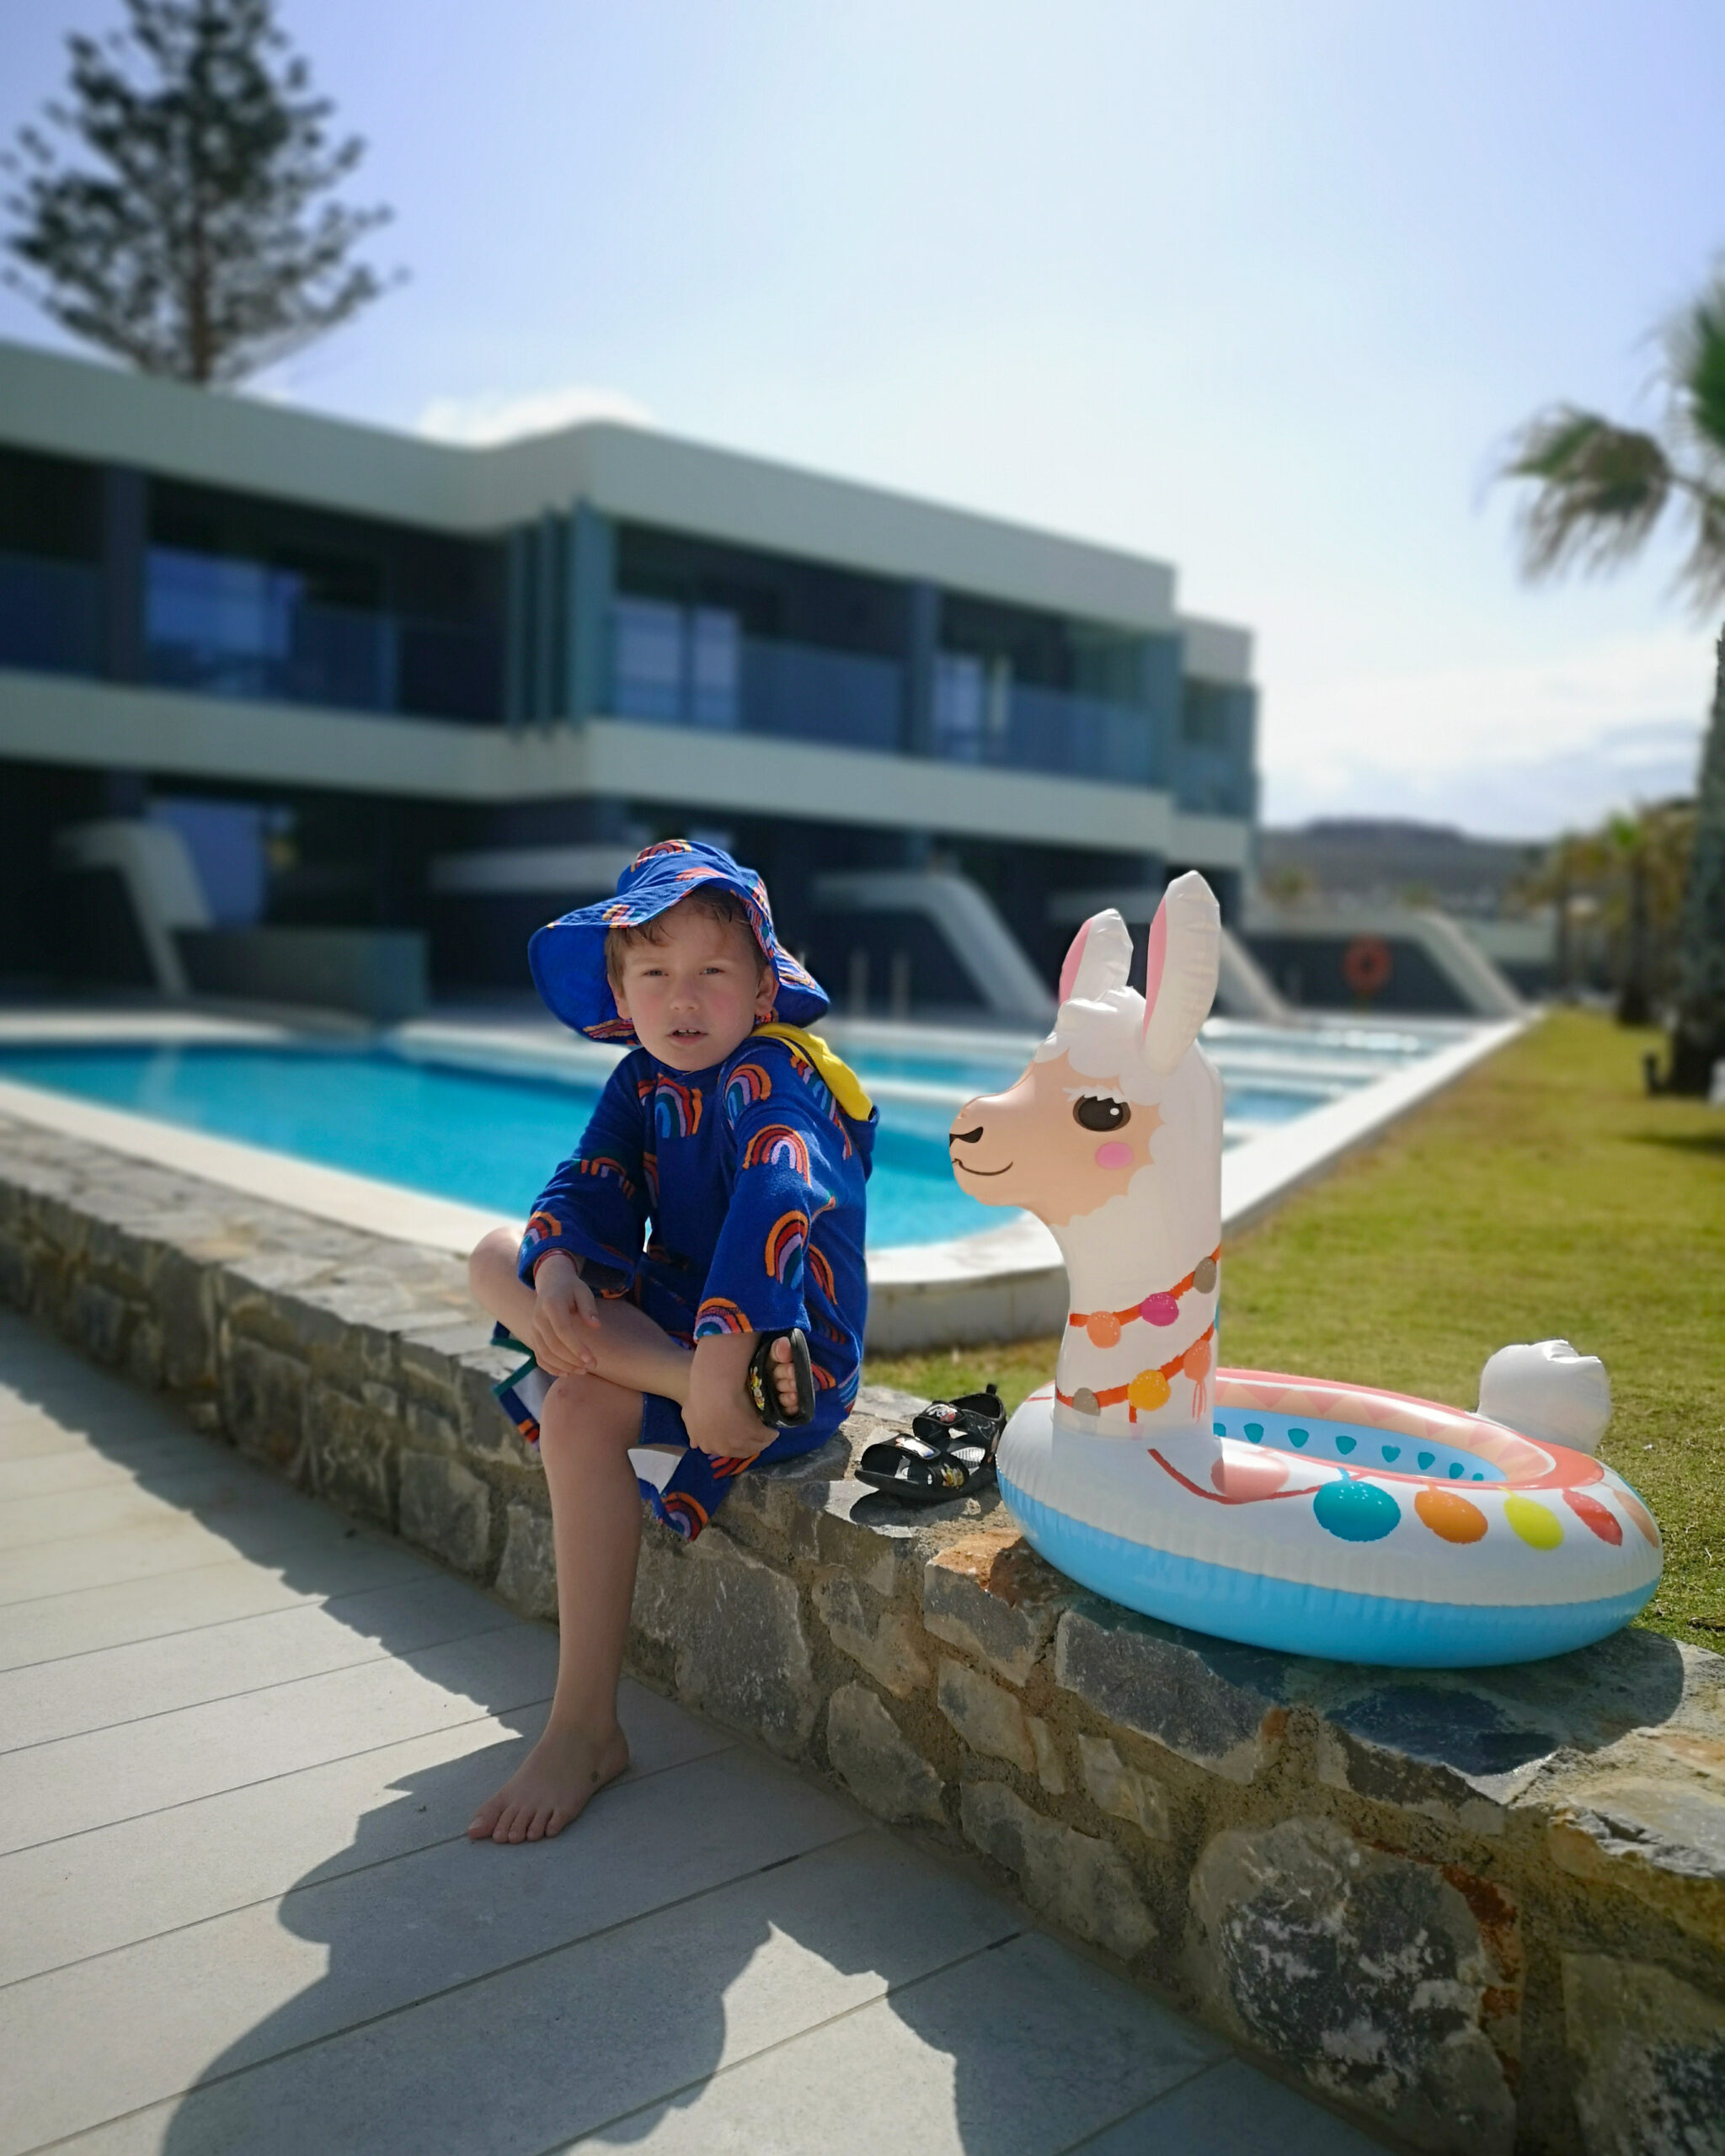 April 2023, Monthly highlights, April 2023 highlights, The Frenchie Mummy, Easter Break, Easter Holiday, Easter Weekend, Crete, Family Travel, Jet2holidays